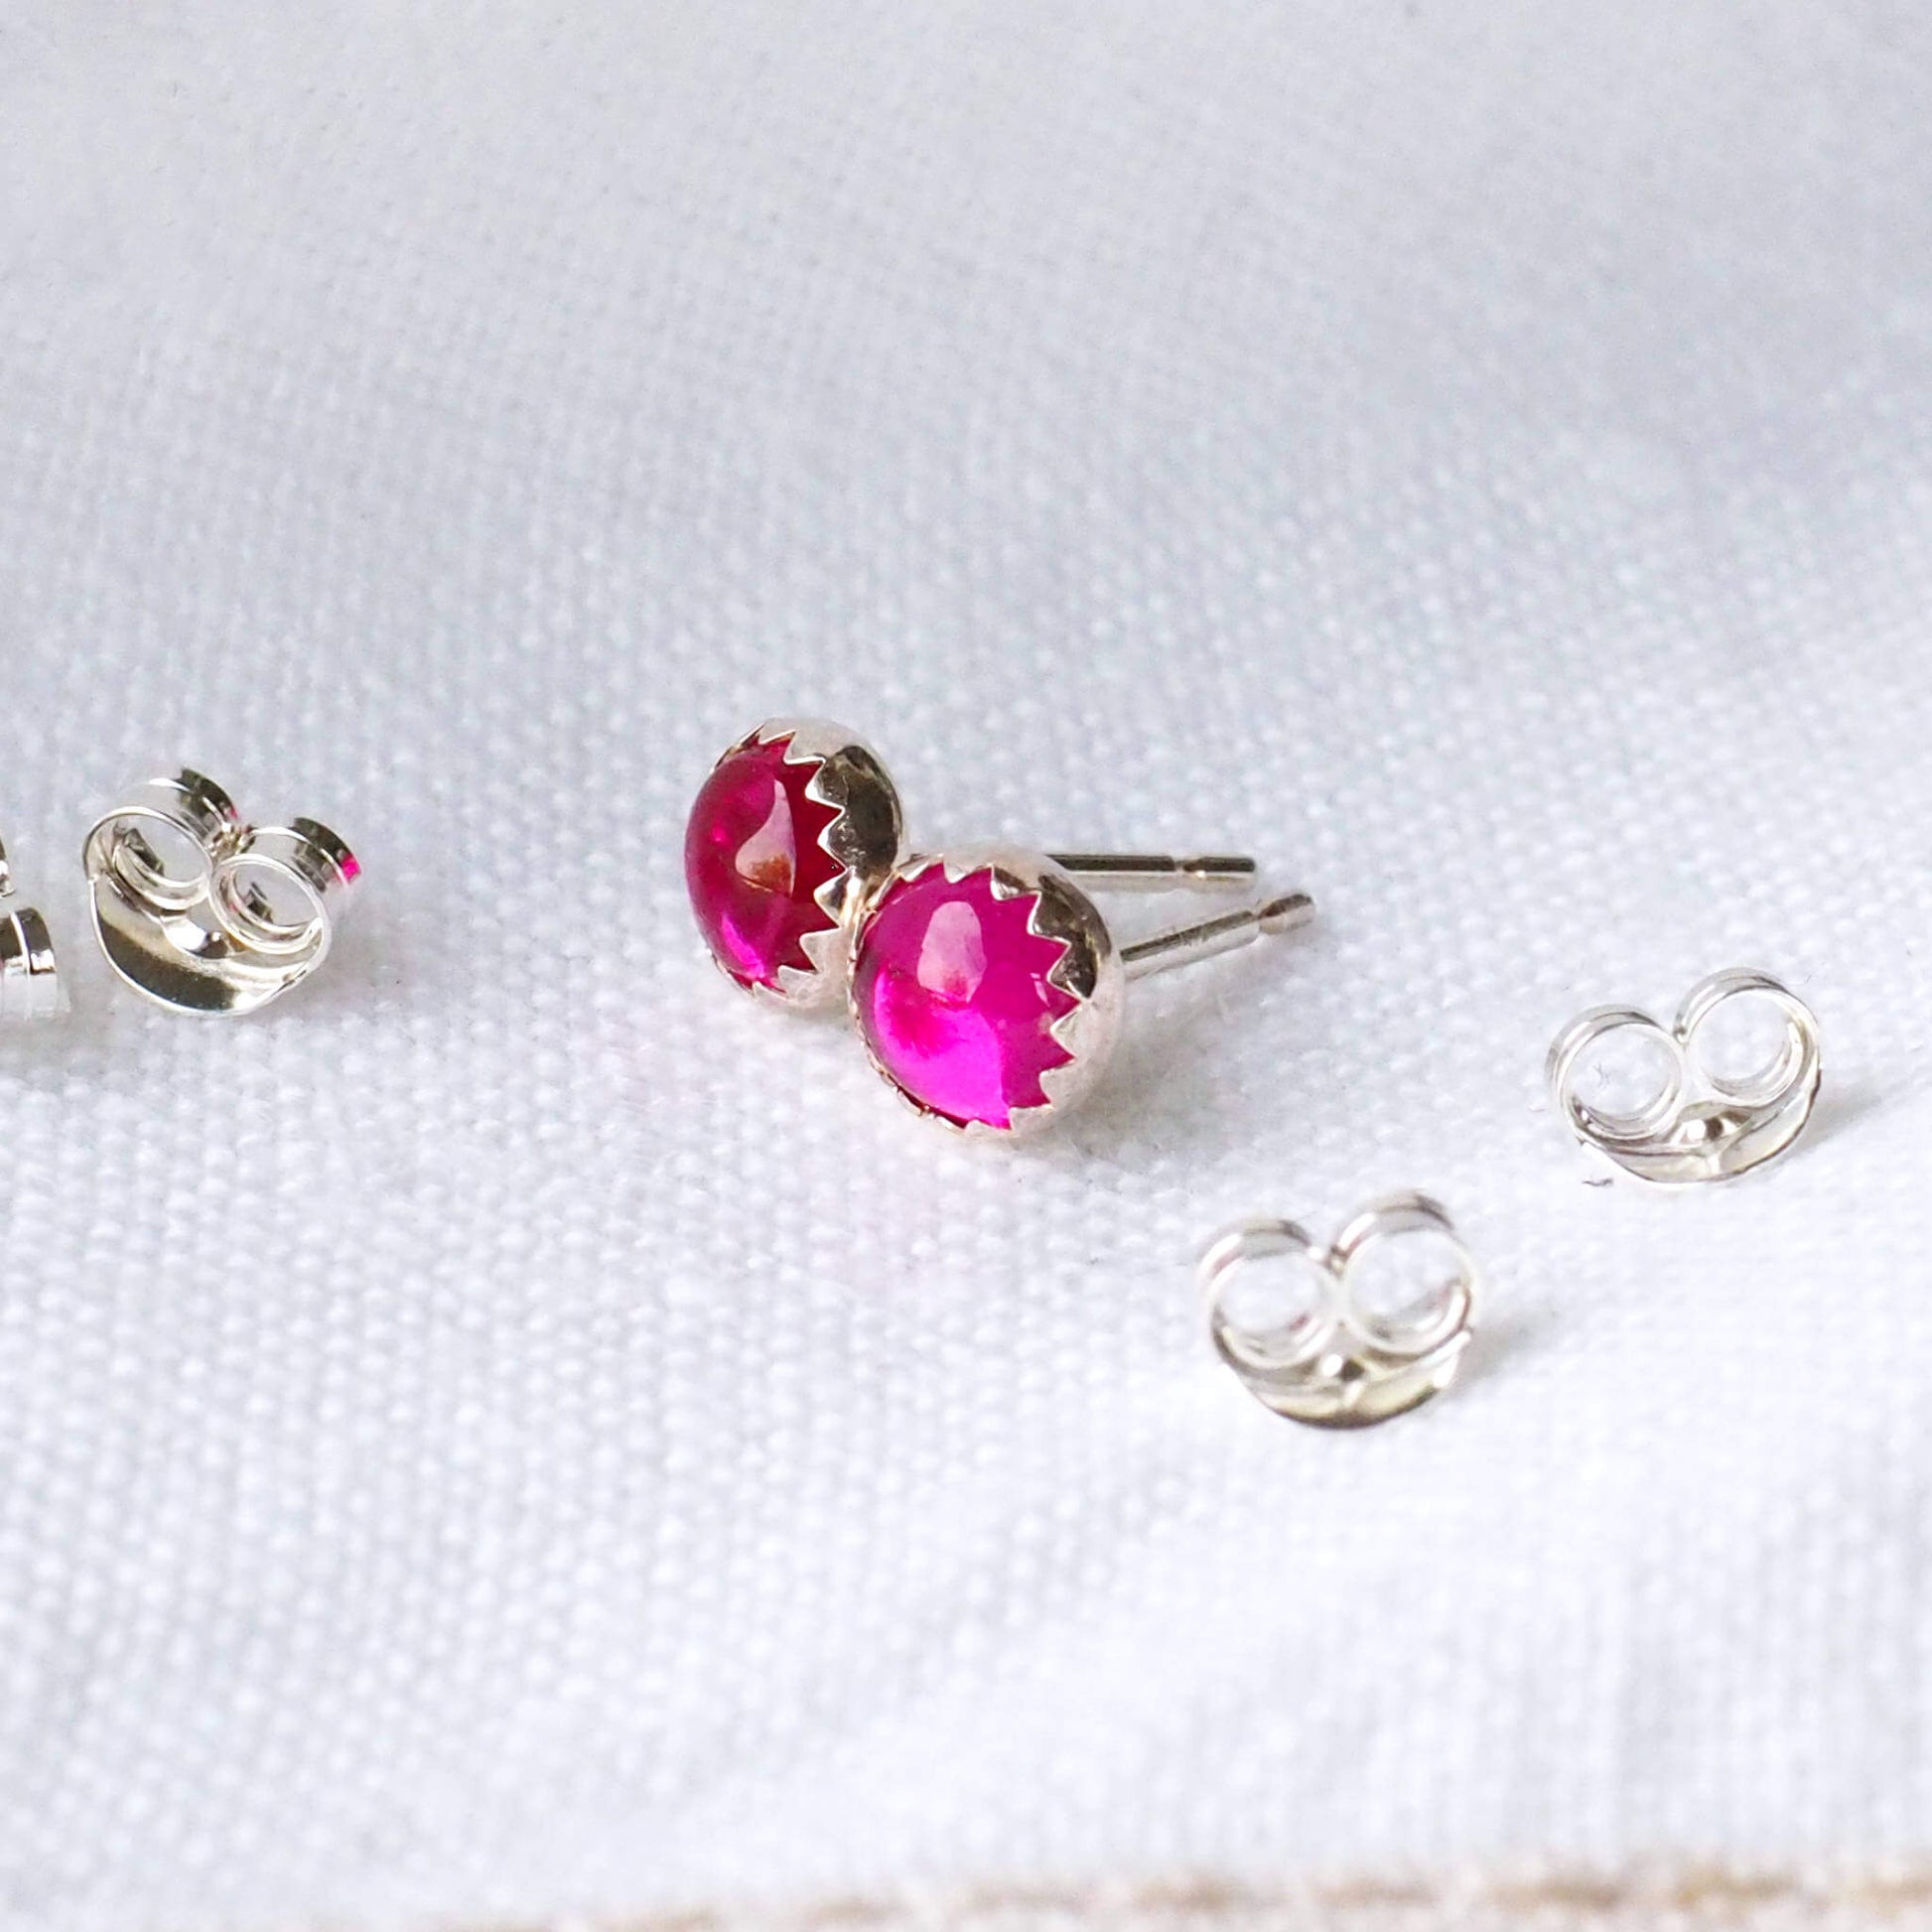 Pair of Hot Pink and SIlver Gemstone studs with a round cabochon gemstone set into a simple sterling silver mount. the earrings are round measuring 5 mm in diameter and are pictured on a white linen background with earring backs at the side. Handcrafted by maram jewellery in Scotland